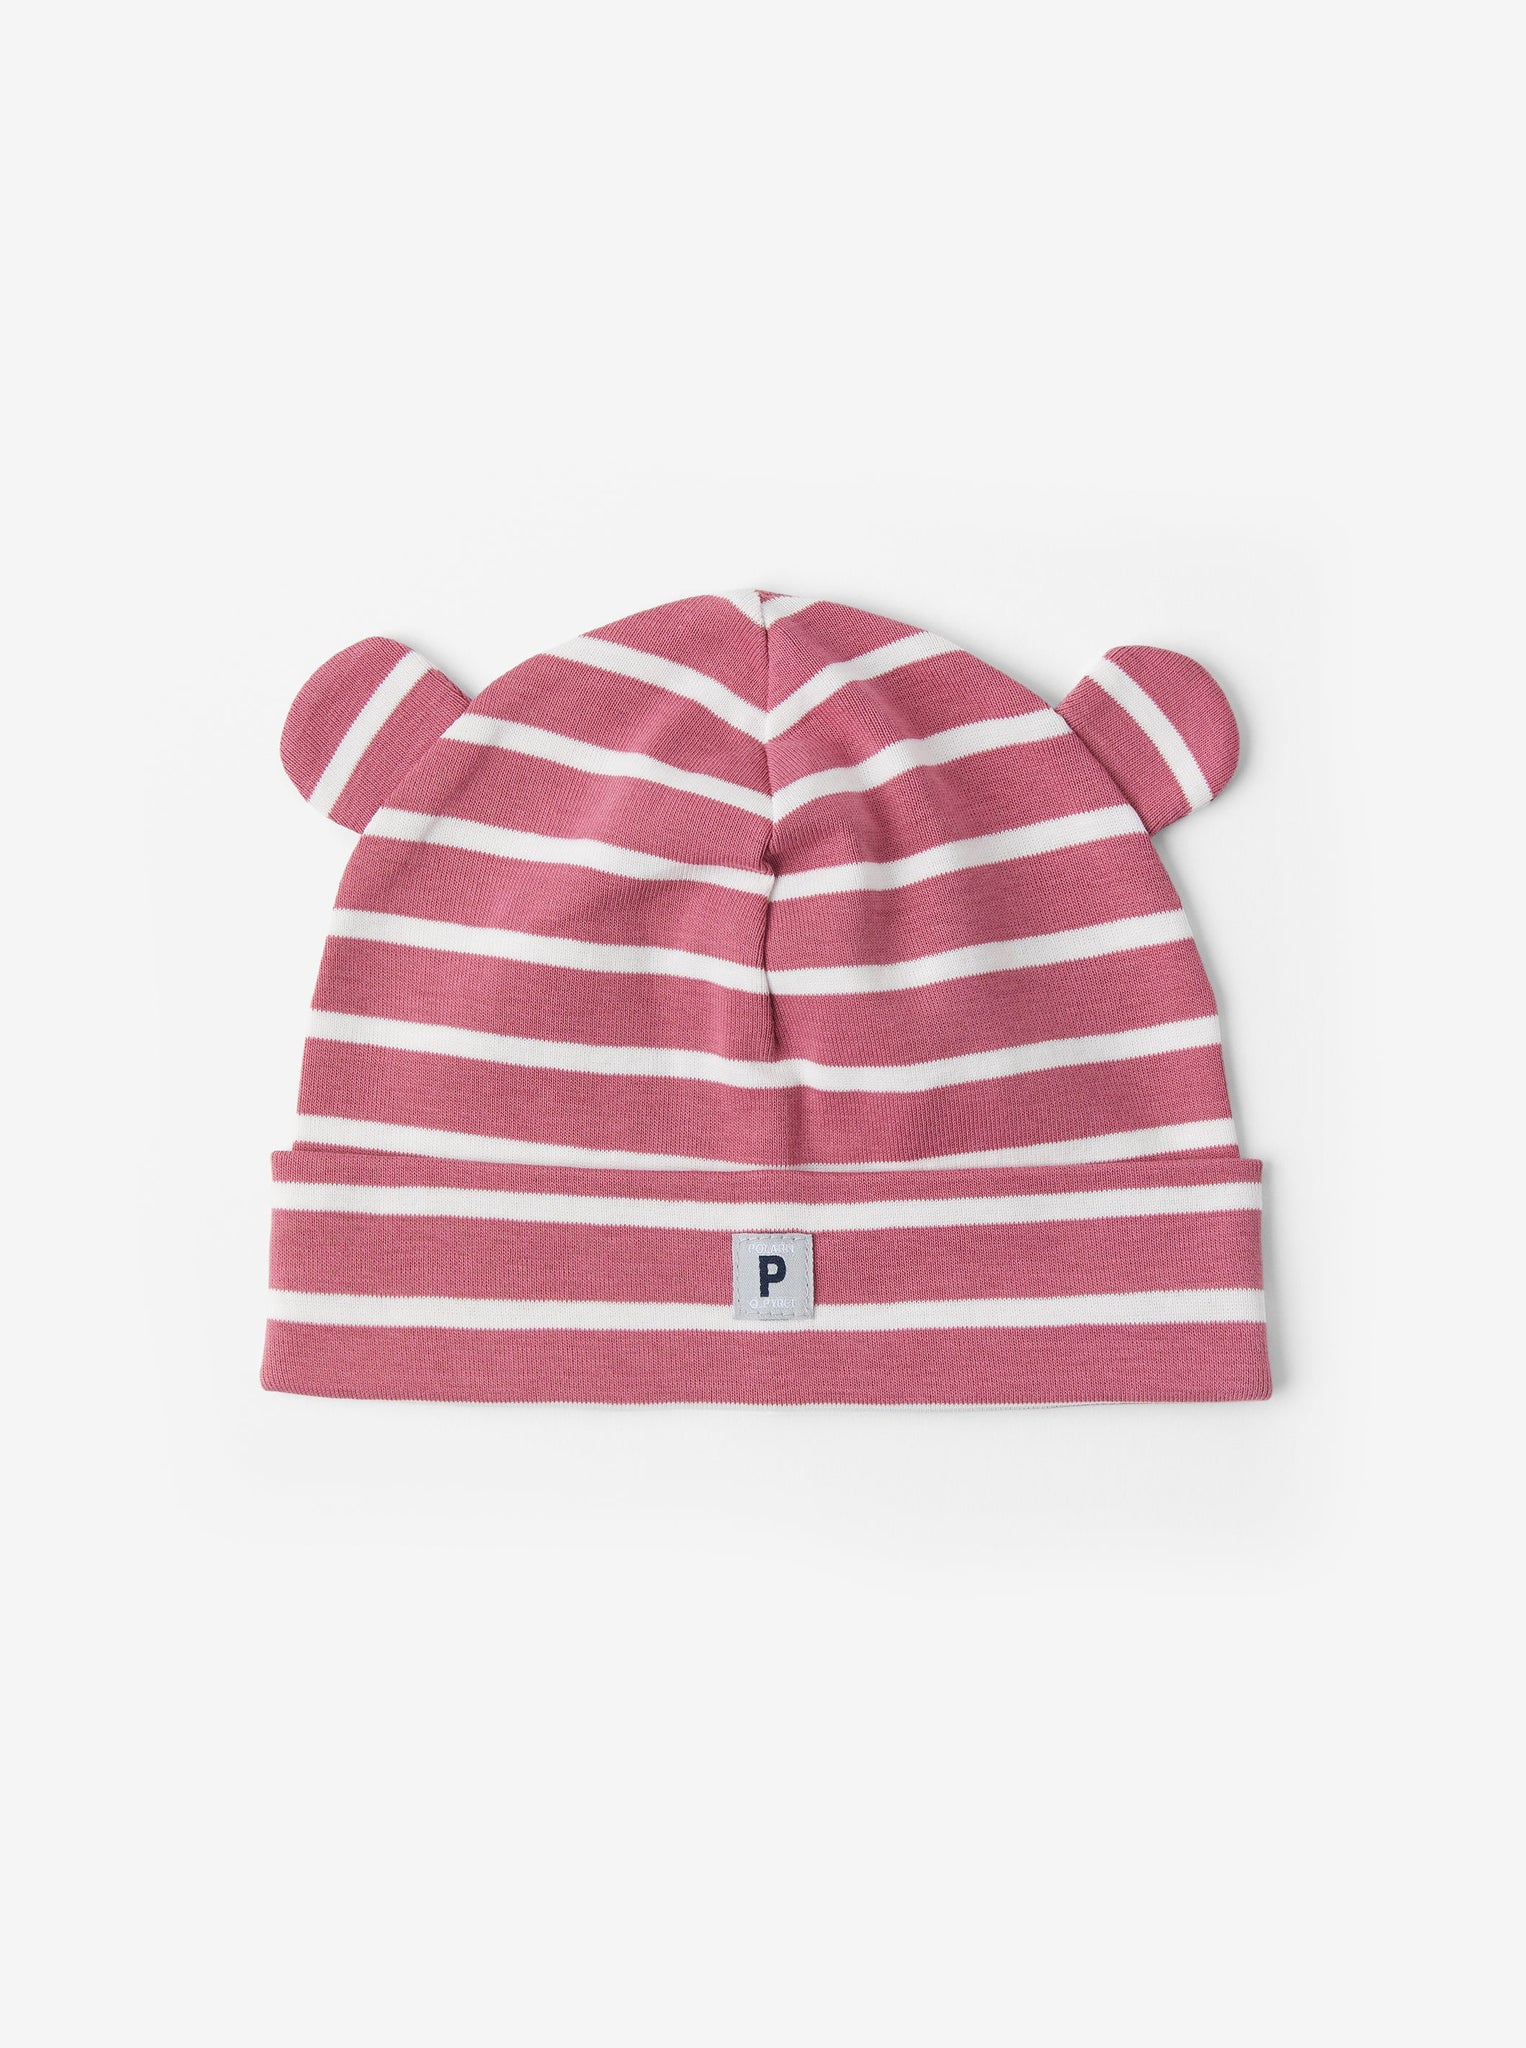 Organic Cotton Pink Baby Beanie Hat from the Polarn O. Pyret Kidswear collection. Ethically produced kids clothing.